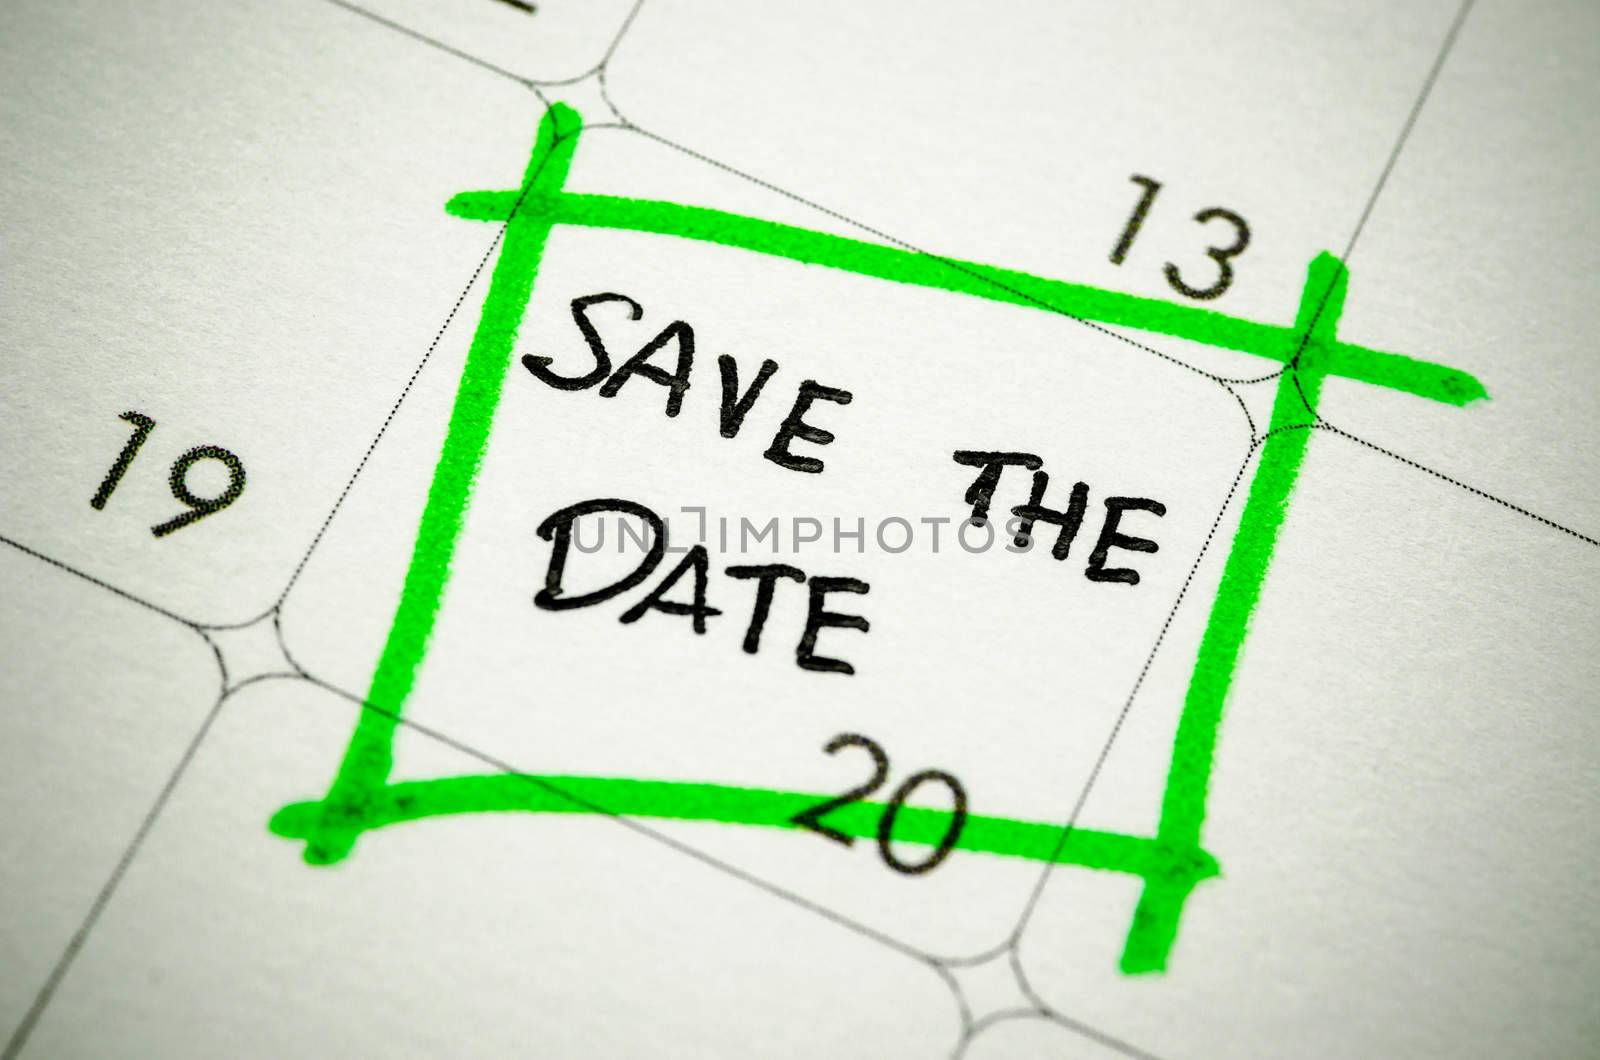 Save the date. by Gamjai